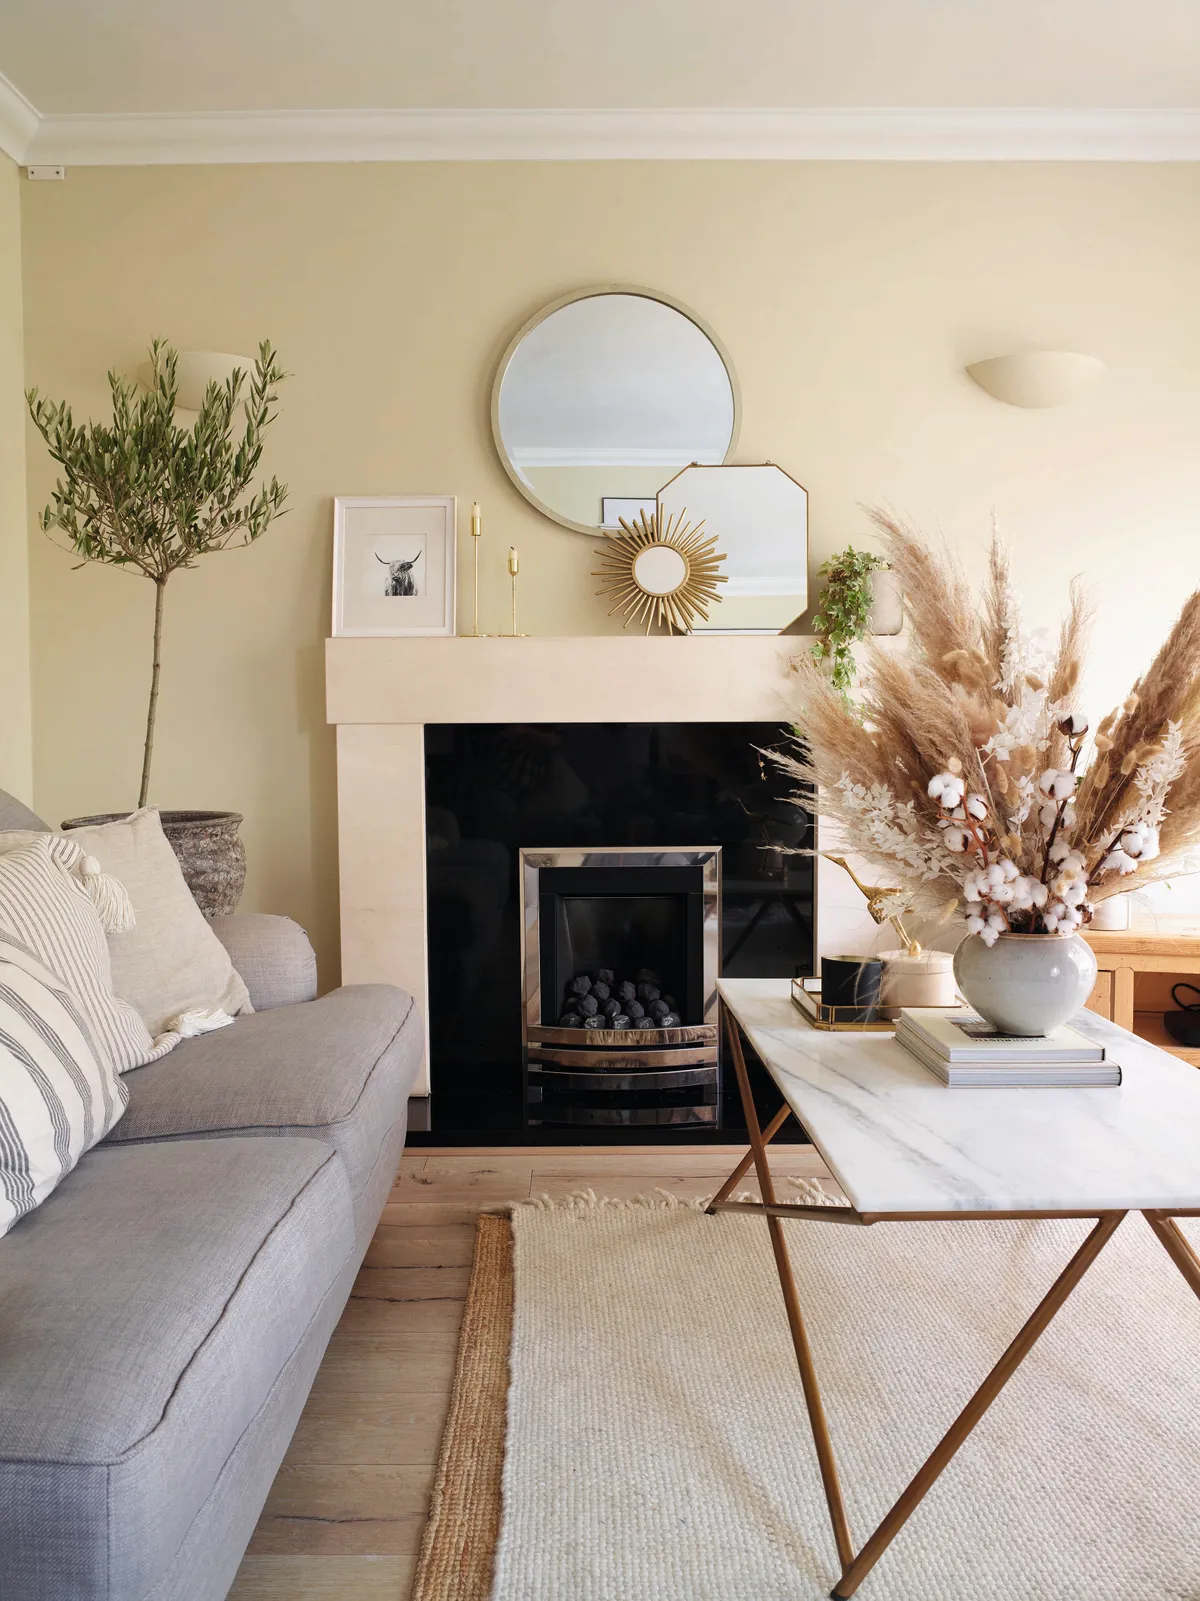 The marble coffee table from Atkin and Thyme was an investment piece for the couple’s home. ‘When we got married, I used the gift money to buy it,’ says Melanie. ‘It’s timeless and we will have it forever’